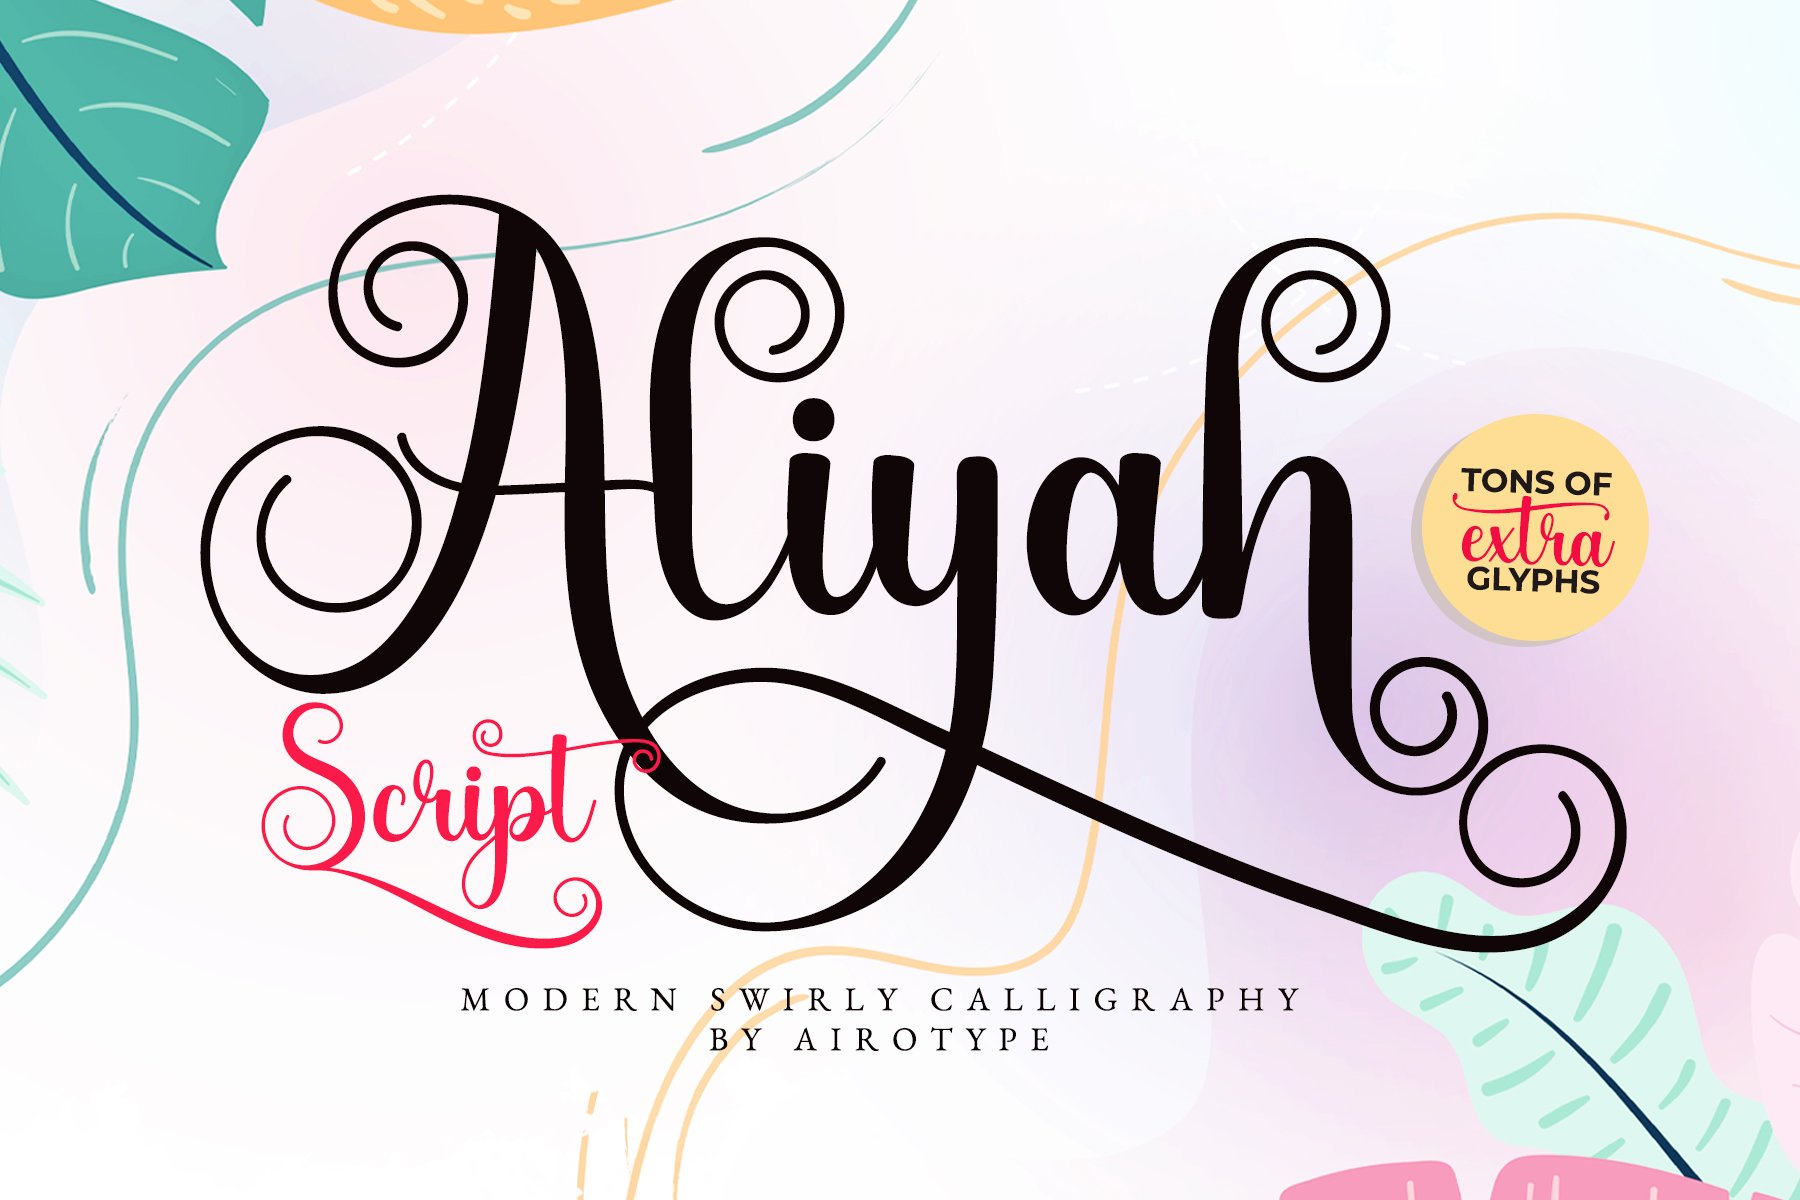 Aliyah - Swirly Calligraphy Font cover image.